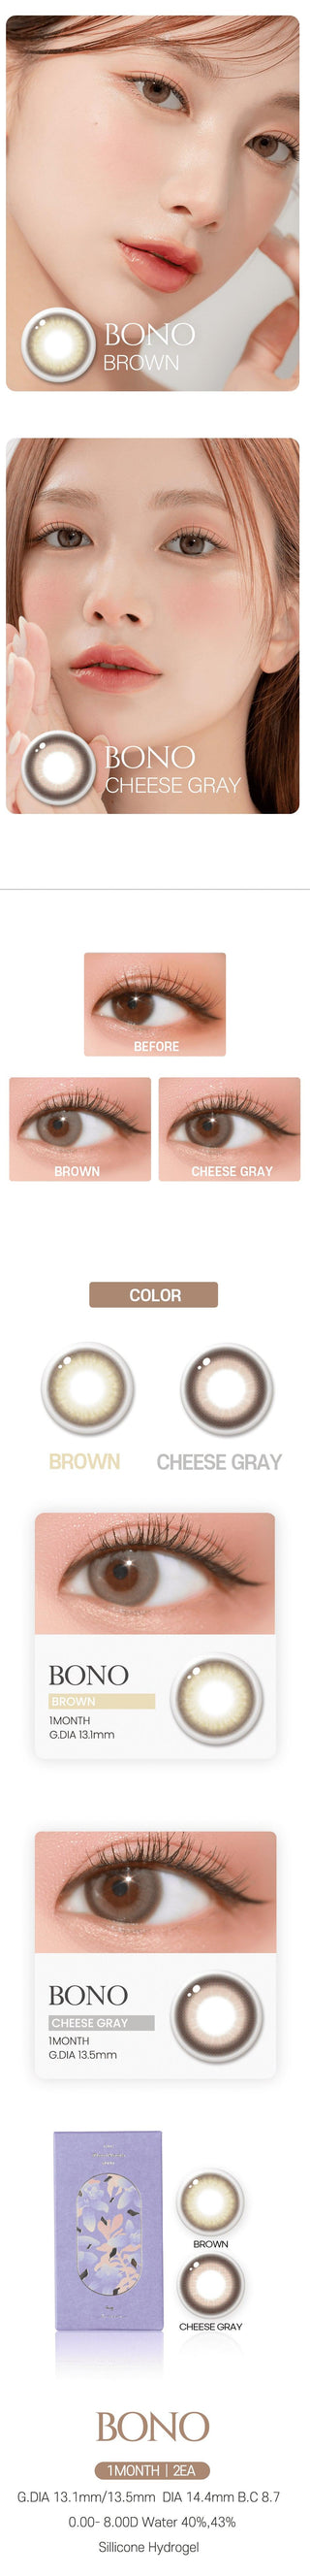 Variety of DooNoon Bono Brown contact lens colors displayed, with closeups of an eye wearing the contact lens colors, and with a model wearing the contact lens colors showing realistic eye-enlarging effect from various angles.